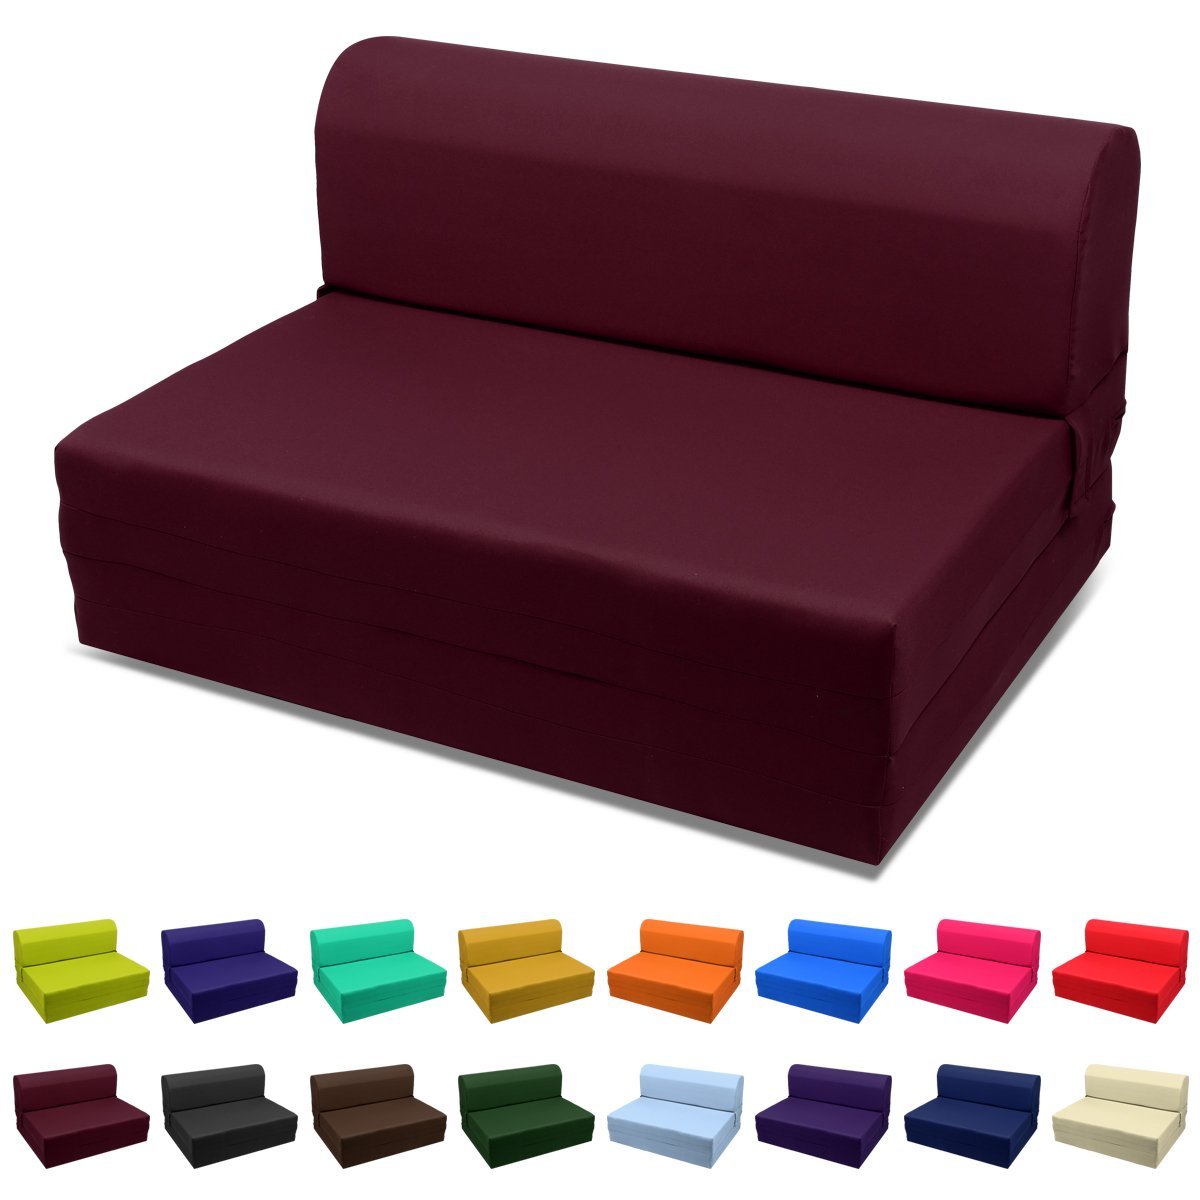 MaGshion Sleeper Chair Folding Foam Bed Sized Twin Size 5x36x70 Inch Burgundy - image 1 of 3